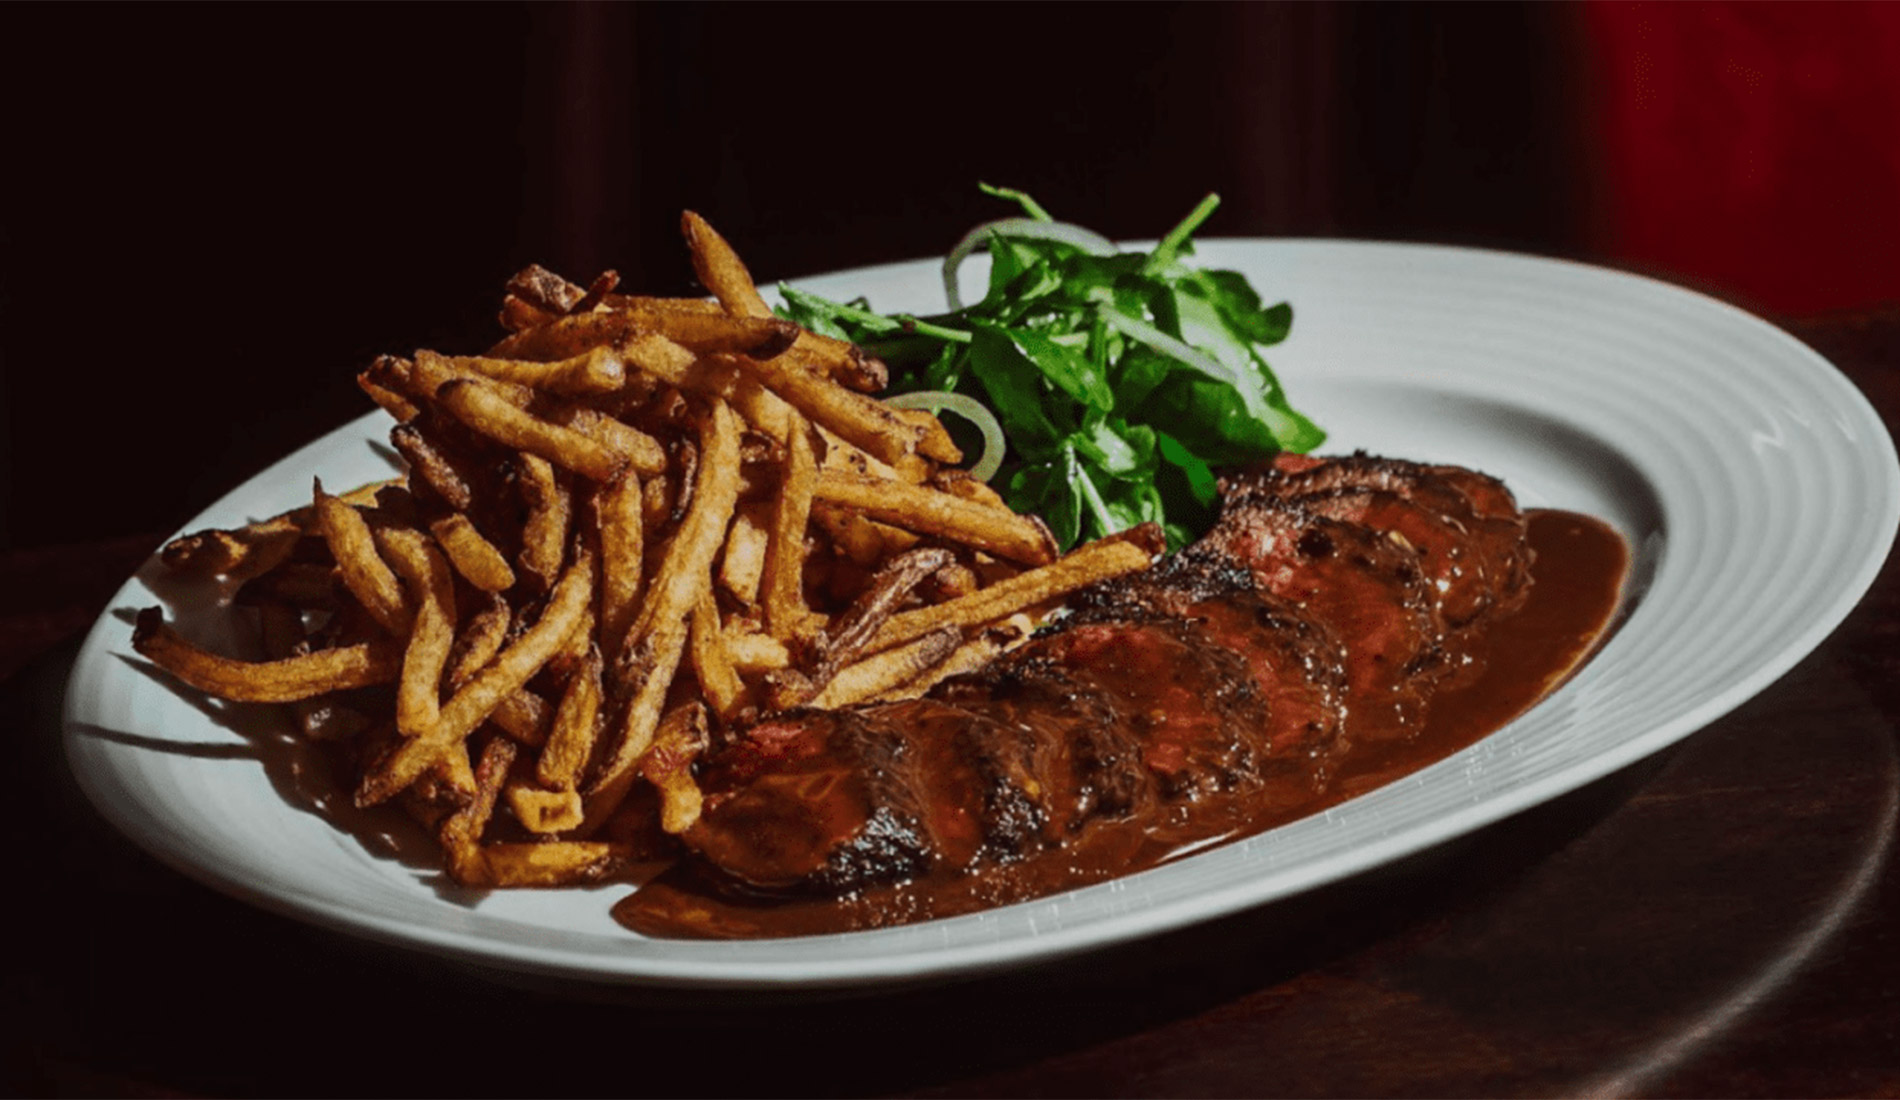 A plate of steak frites from DW French